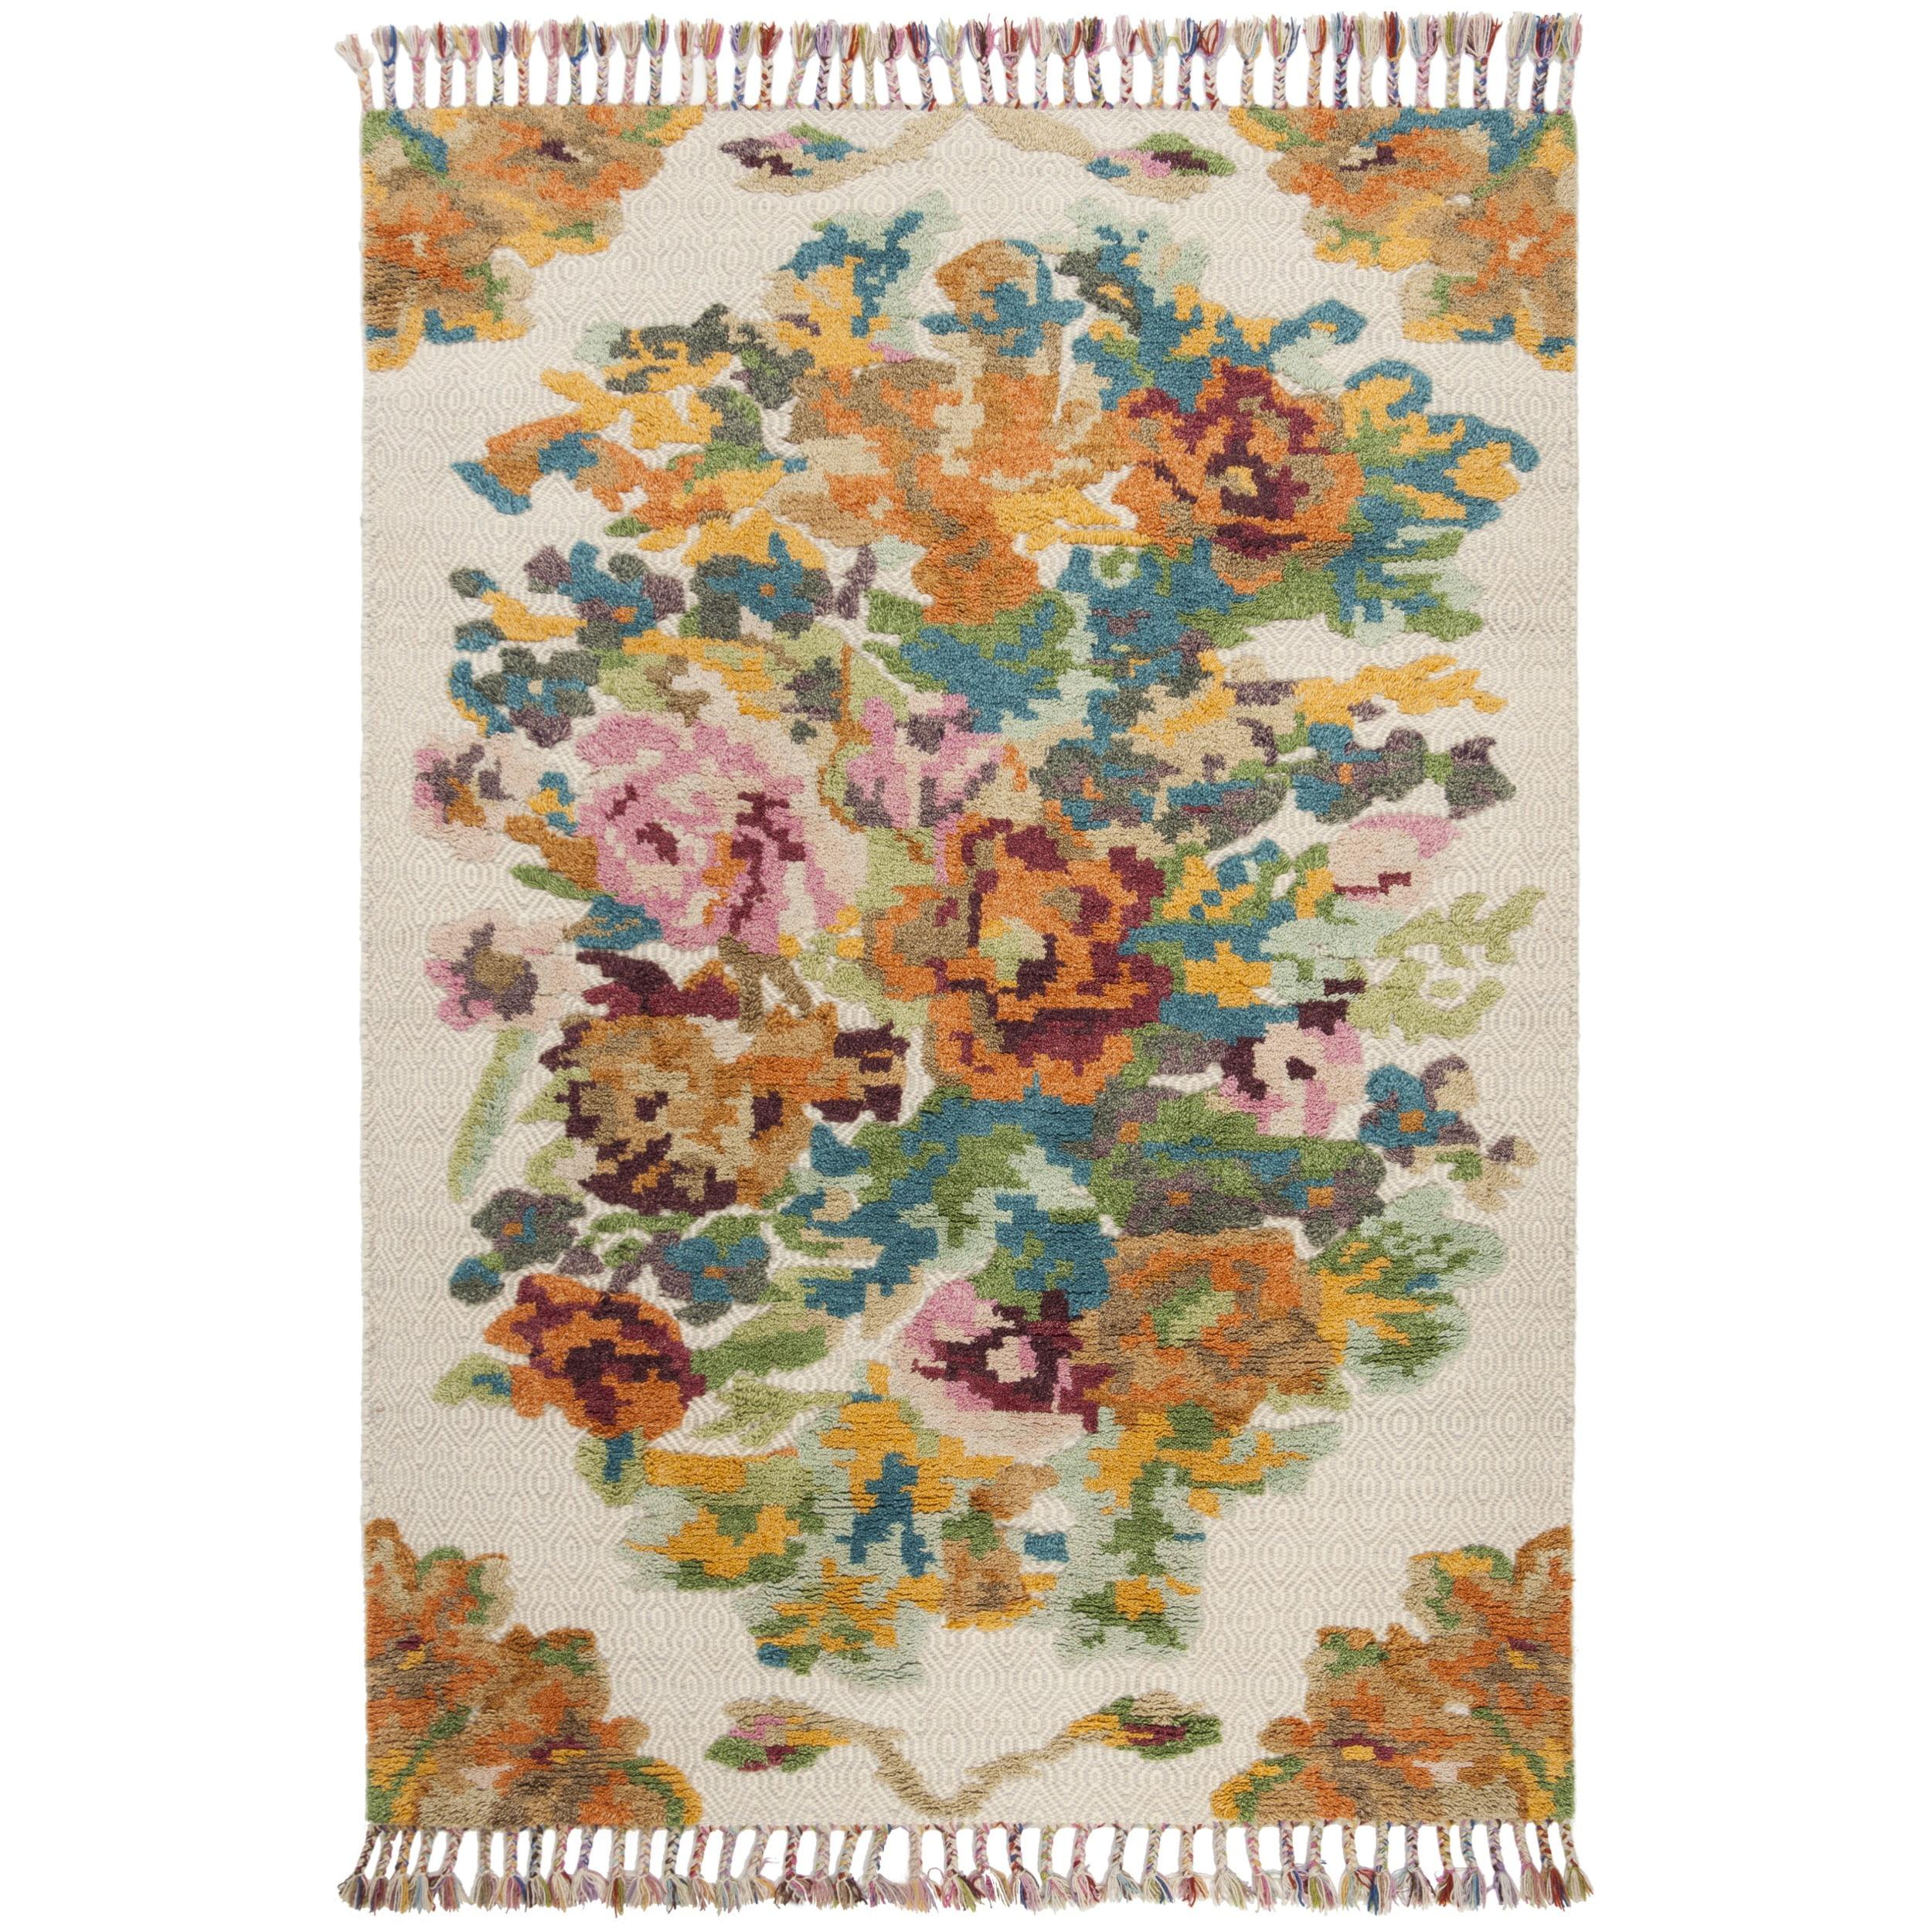 Hand-Knotted Floral Essence Wool Area Rug, Gray and Orange, 9' x 12'